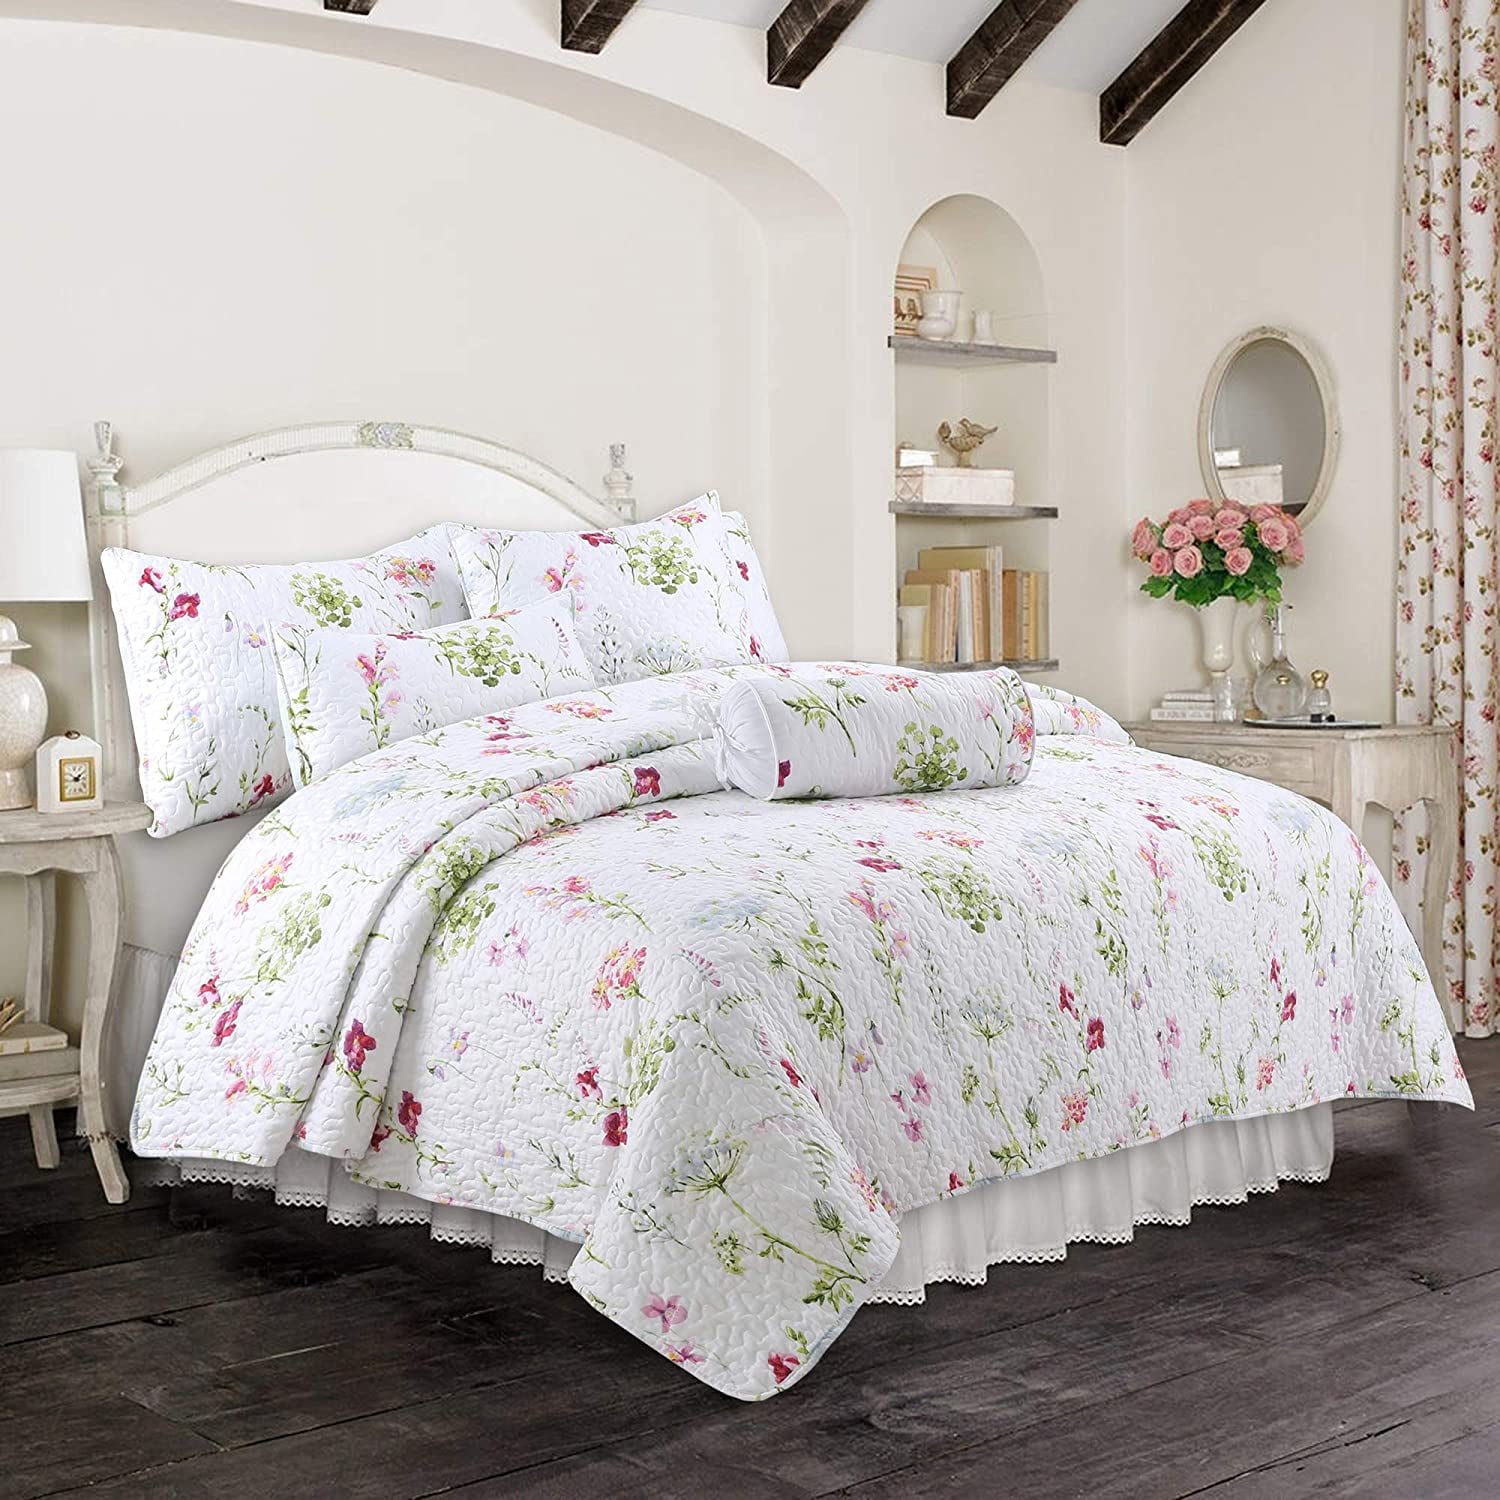 Cozy Line Home Fashions Teen Floral Cotton/Microfiber/Polyester Reversible  Bedding Sets, Full/Queen, 3-Pieces